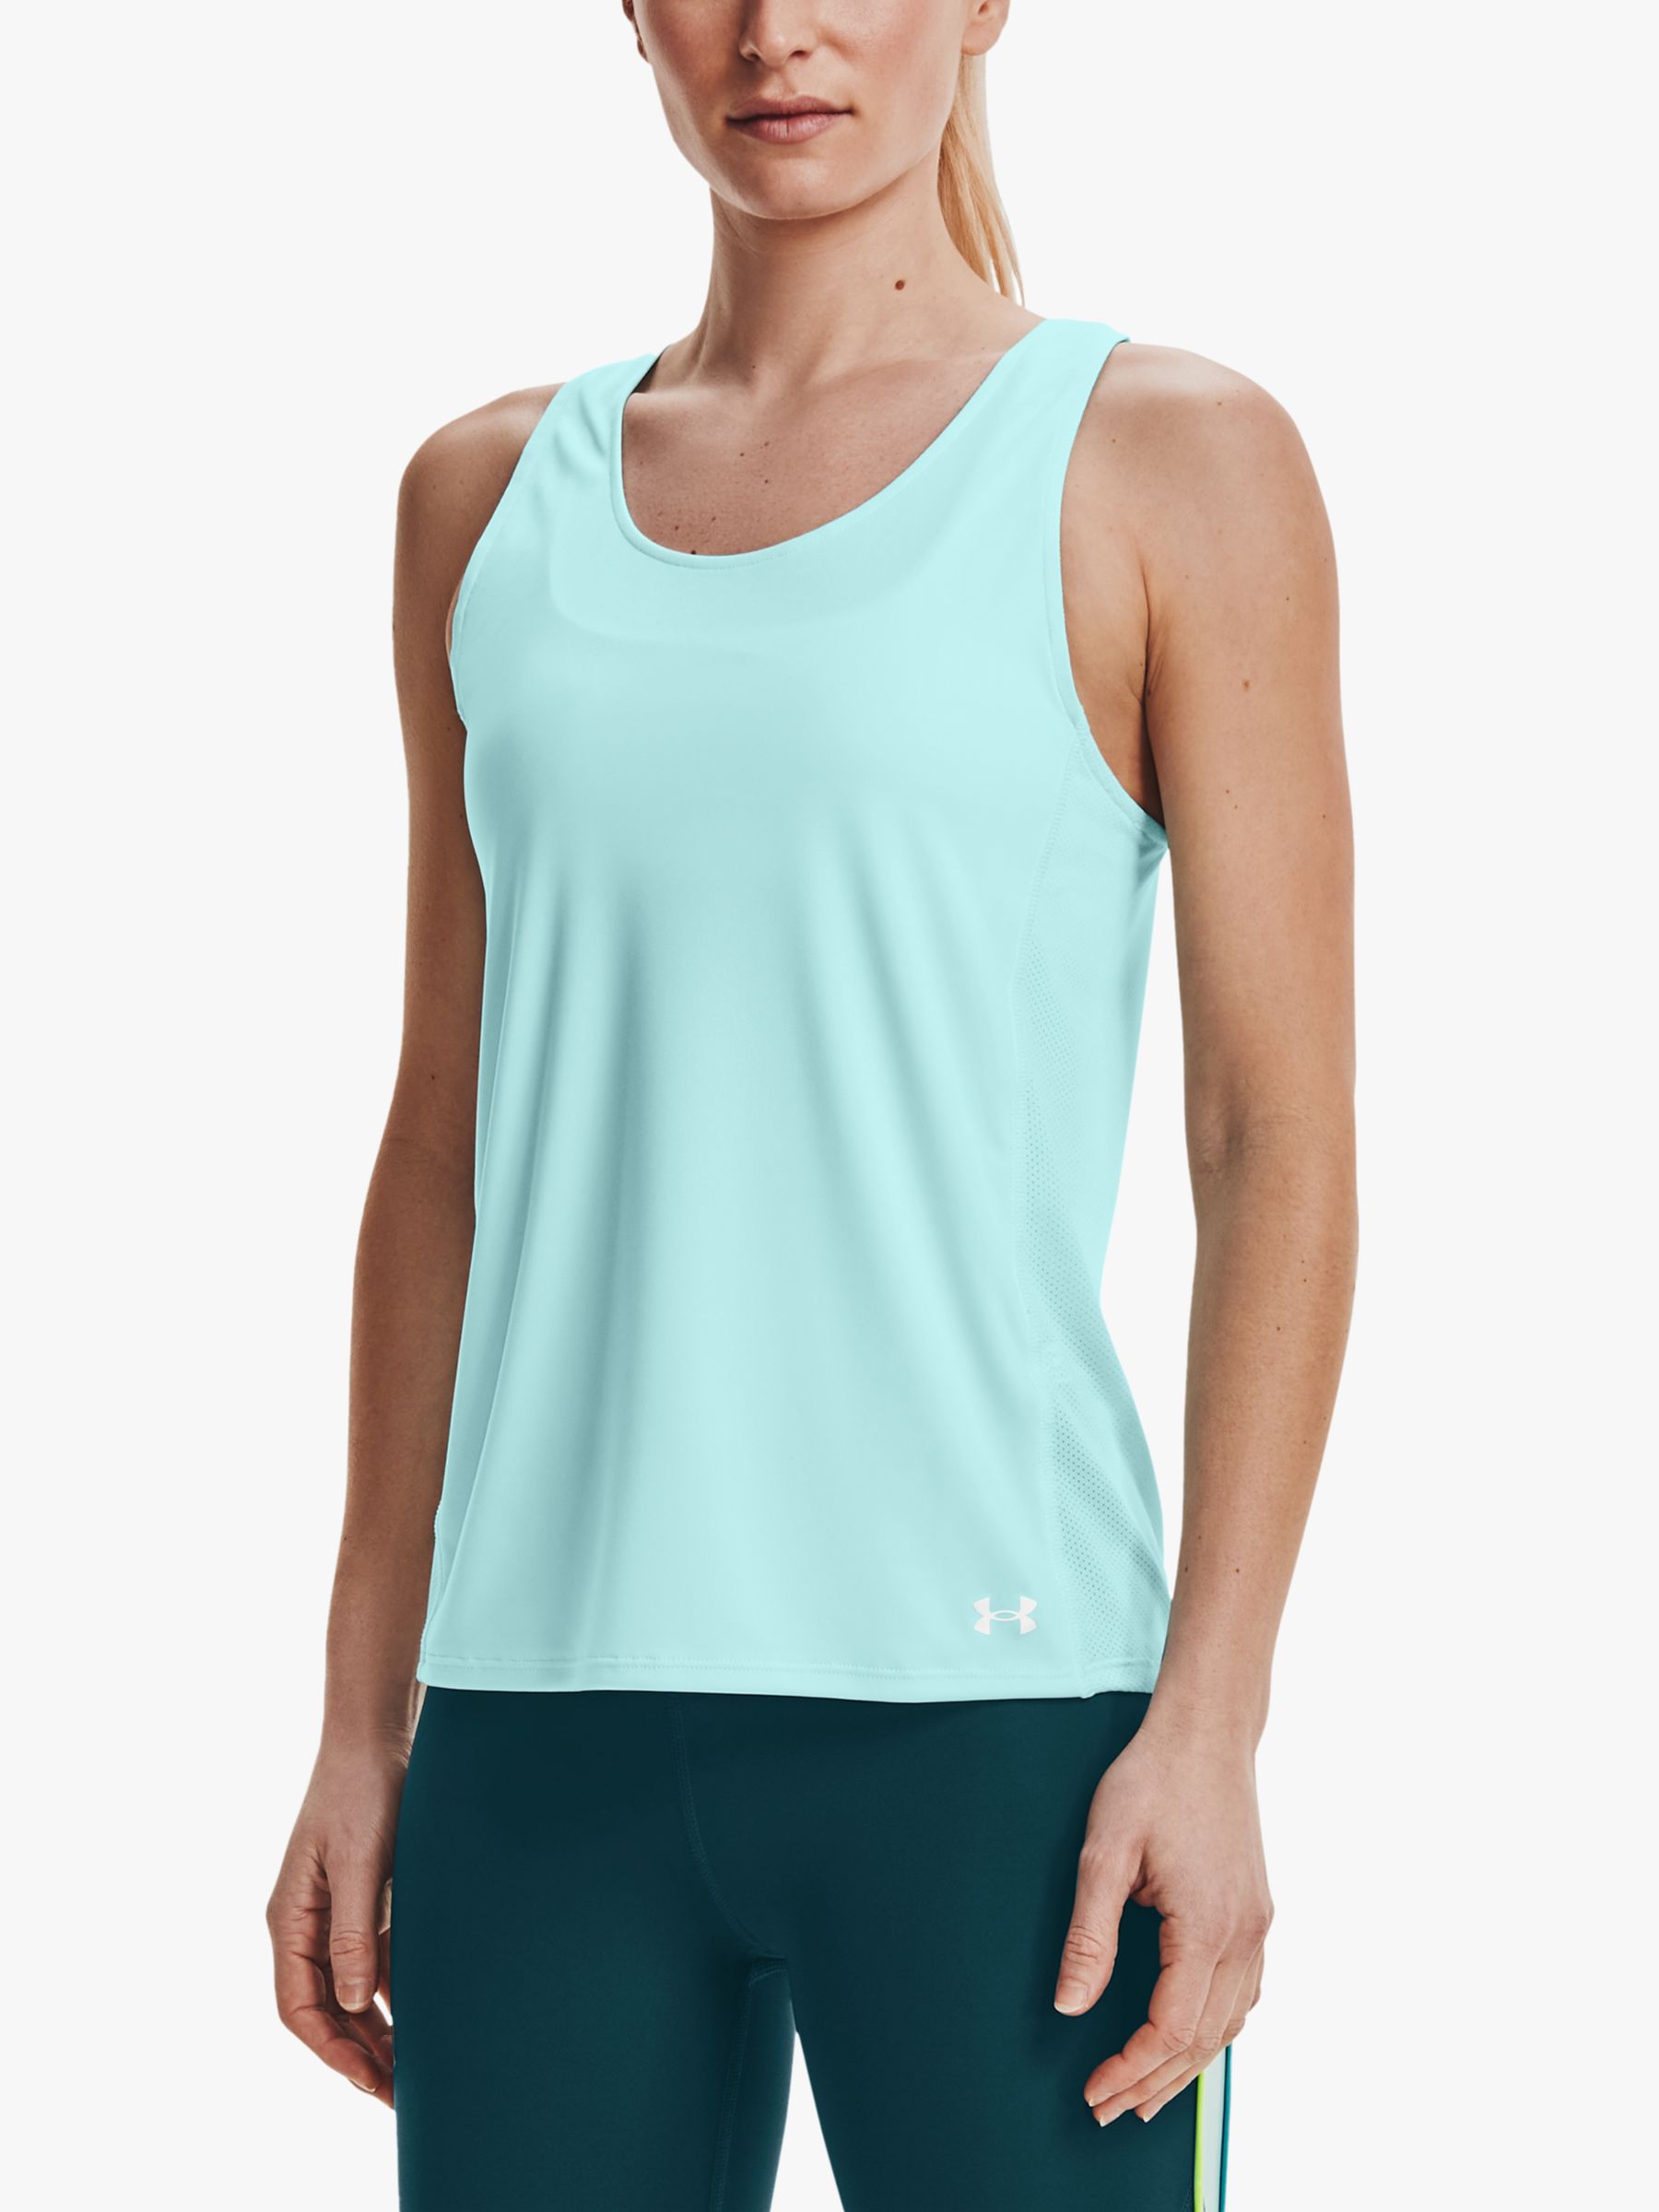 Under Armour Fly-By Running Vest, Breeze, XS